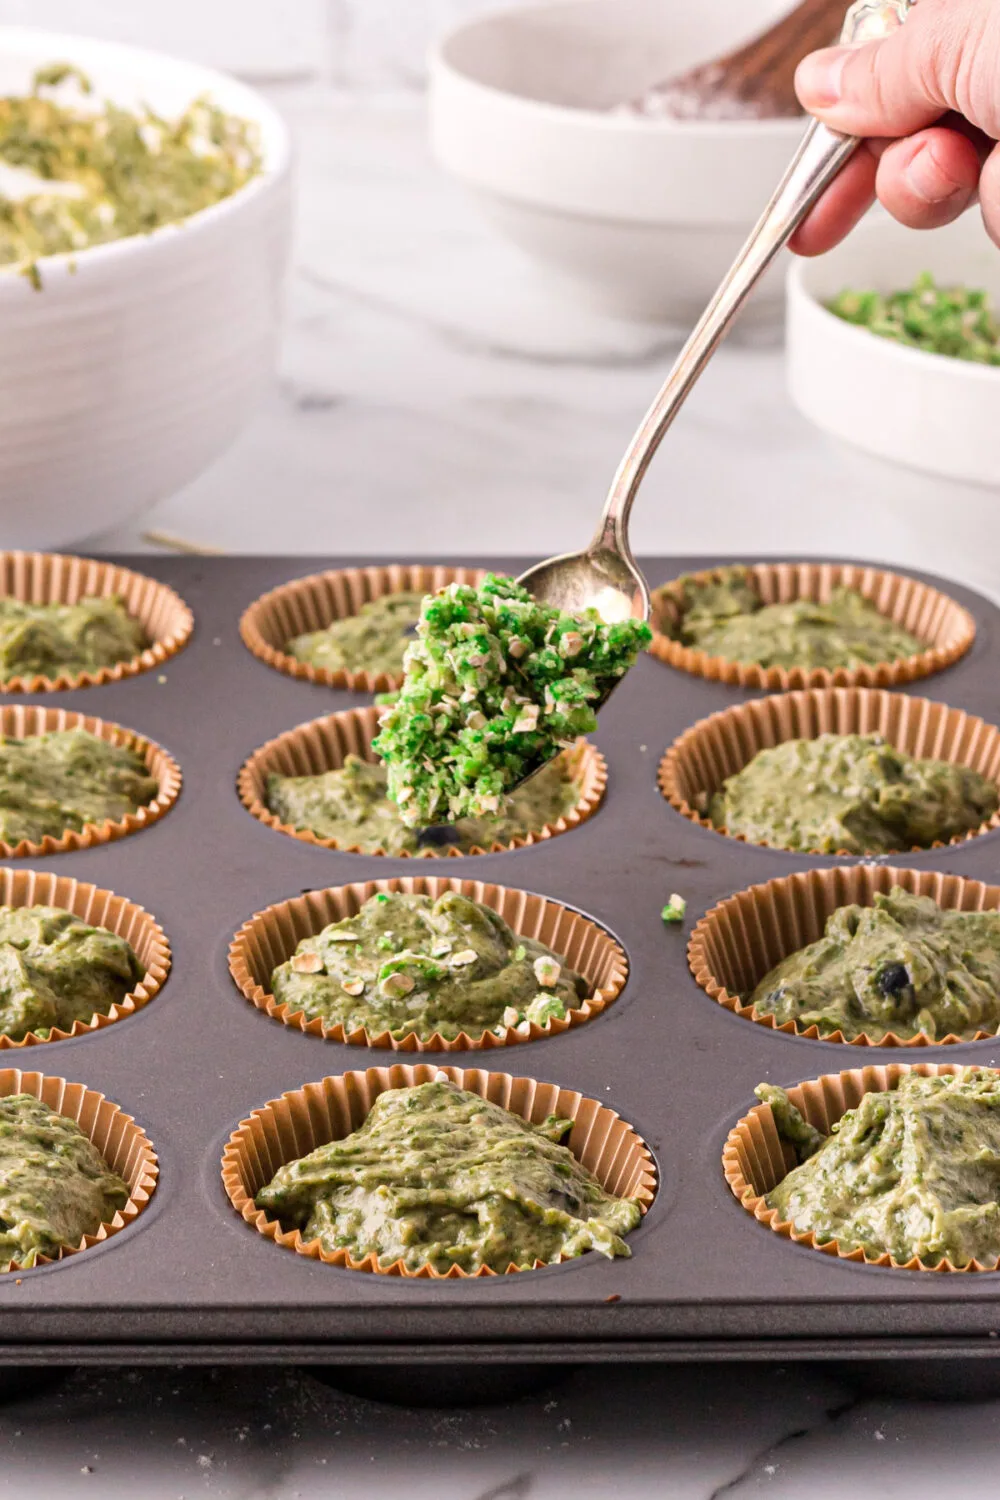 Topping muffins with green crumble in a muffin tin.